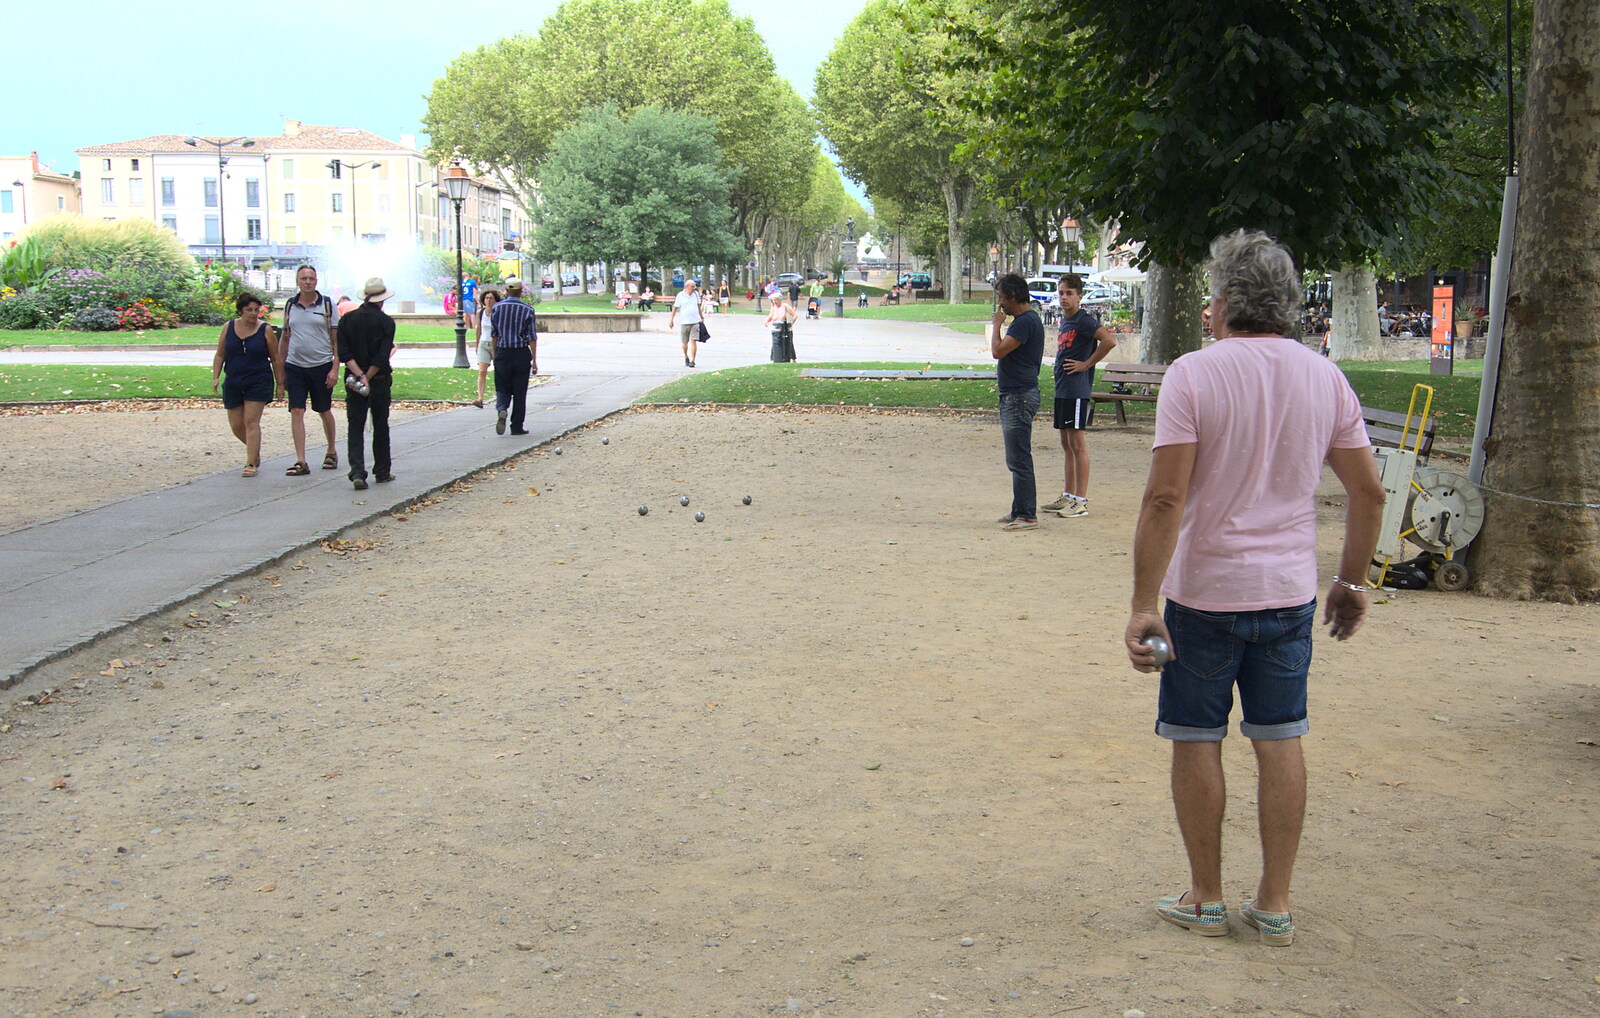 The next shot is considered from Le Gouffre Géant and Grotte de Limousis, Petanque and a Lightning Storm, Languedoc, France - 12th August 2018